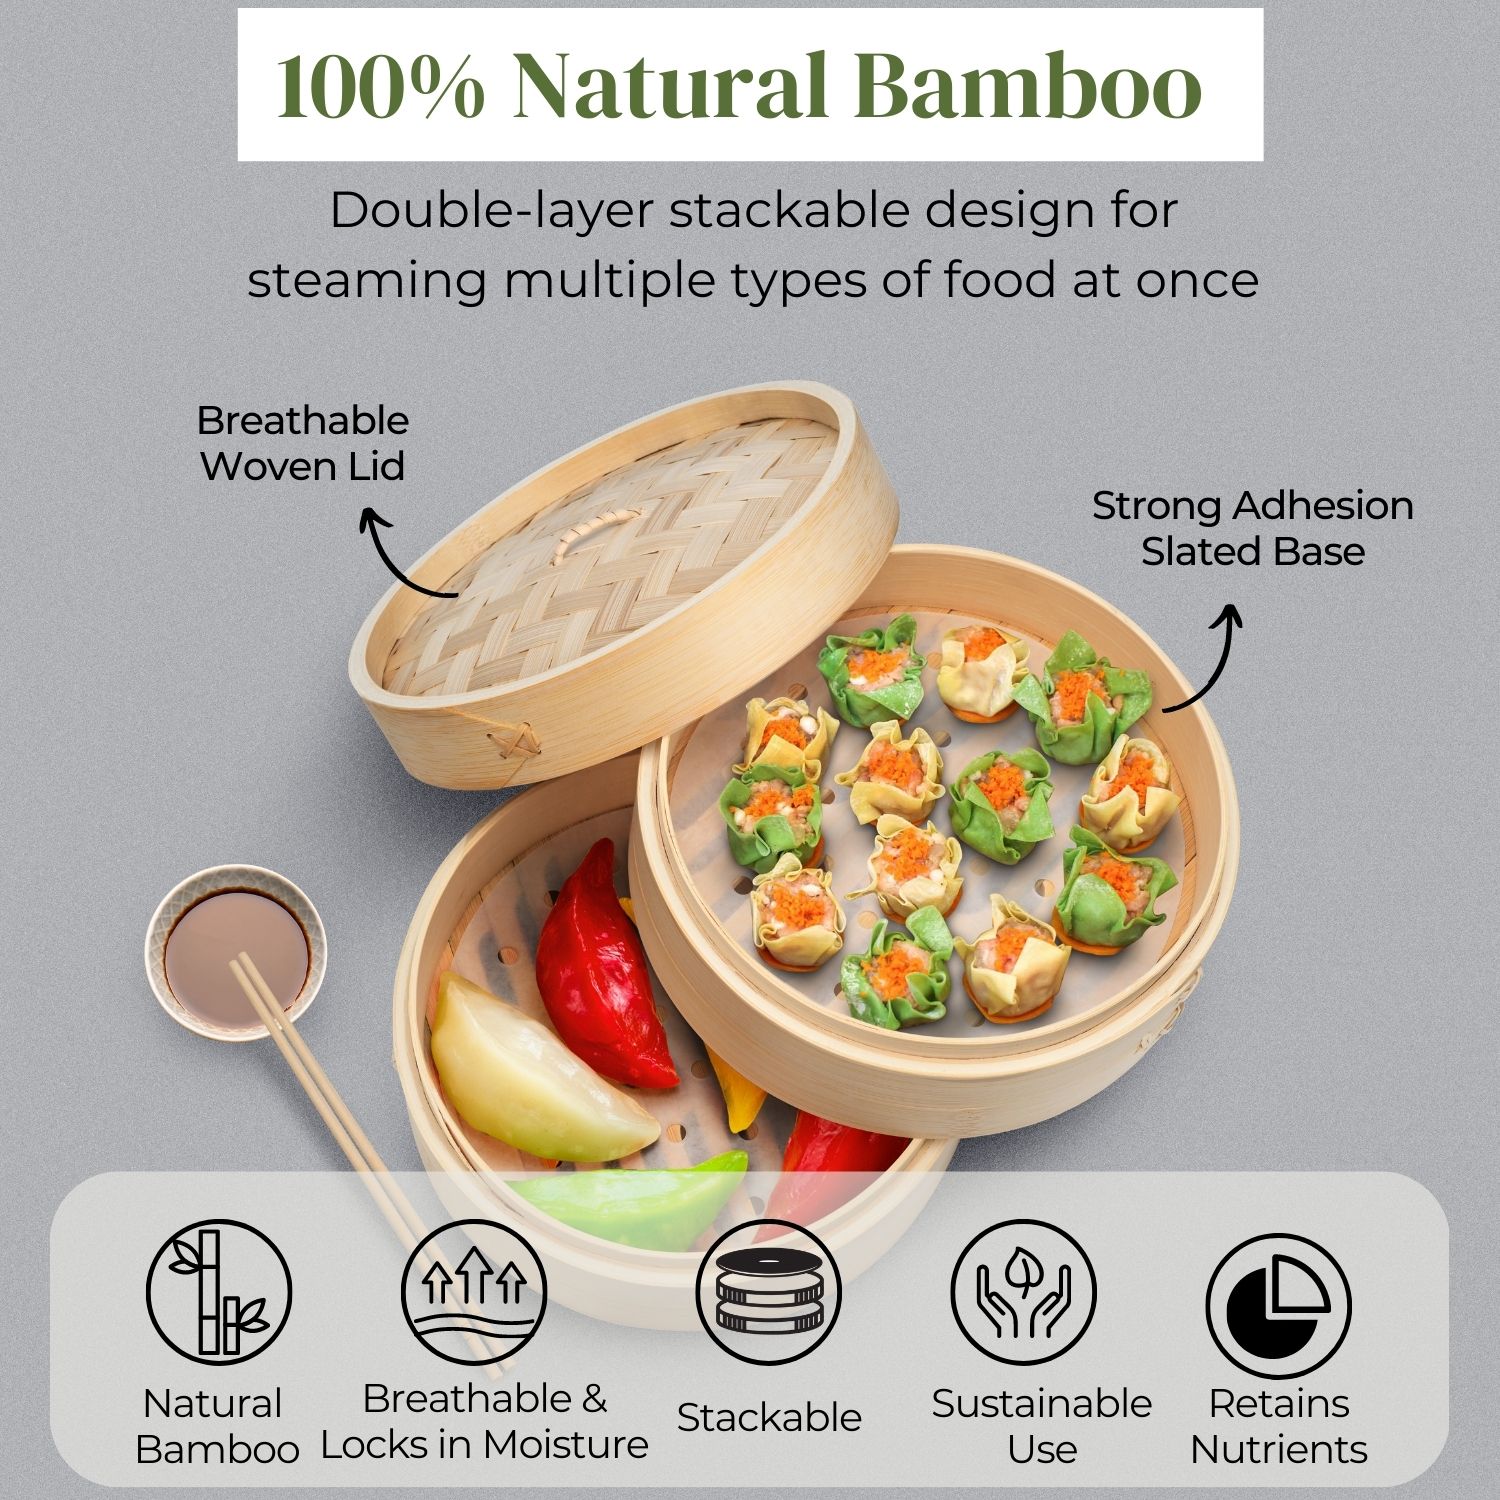 Healthy Way of Cooking: Using bamboo steamers is a lot better than frying or grilling food. It helps in maintaining the color, vitamins, nutrients, and flavor of vegetables. Cooks over a single heat source and fits most 10 Inch pots.  Very economical and saves more time